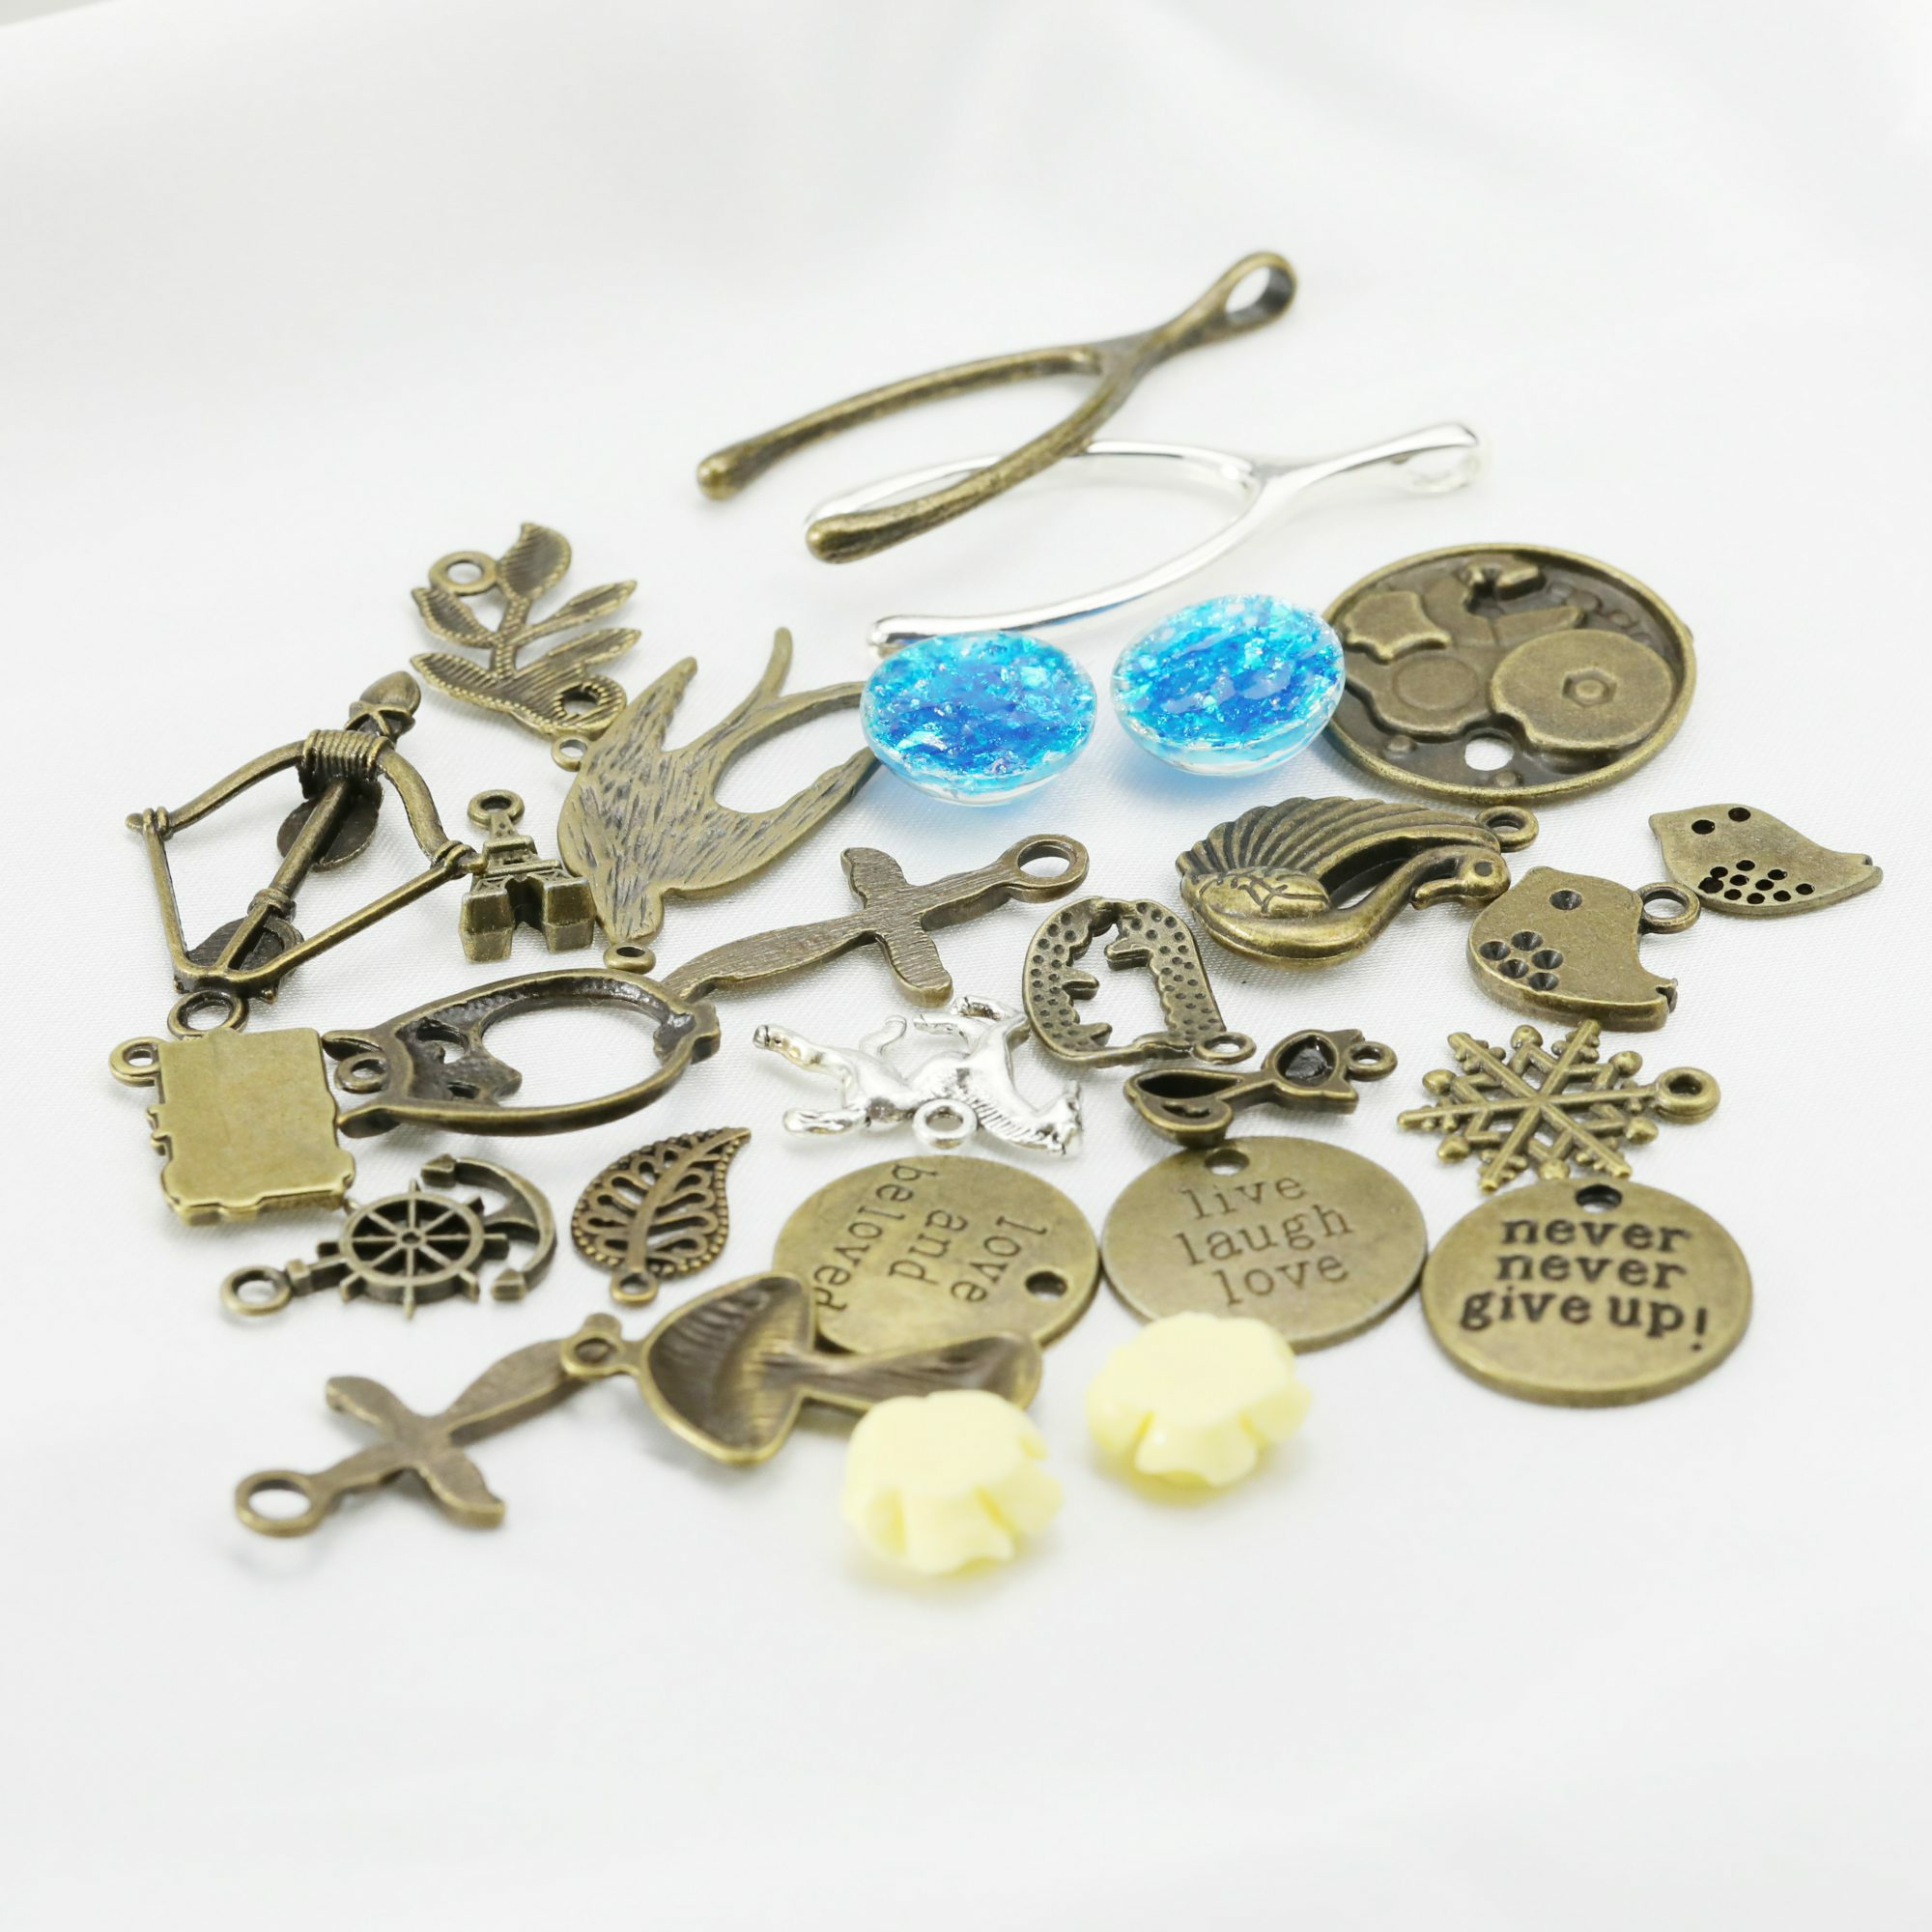 50Pcs Assortment Antiqued Bronze Alloy Pendant Charm DIY Jewlery Supplies Findings 1800521 - Click Image to Close